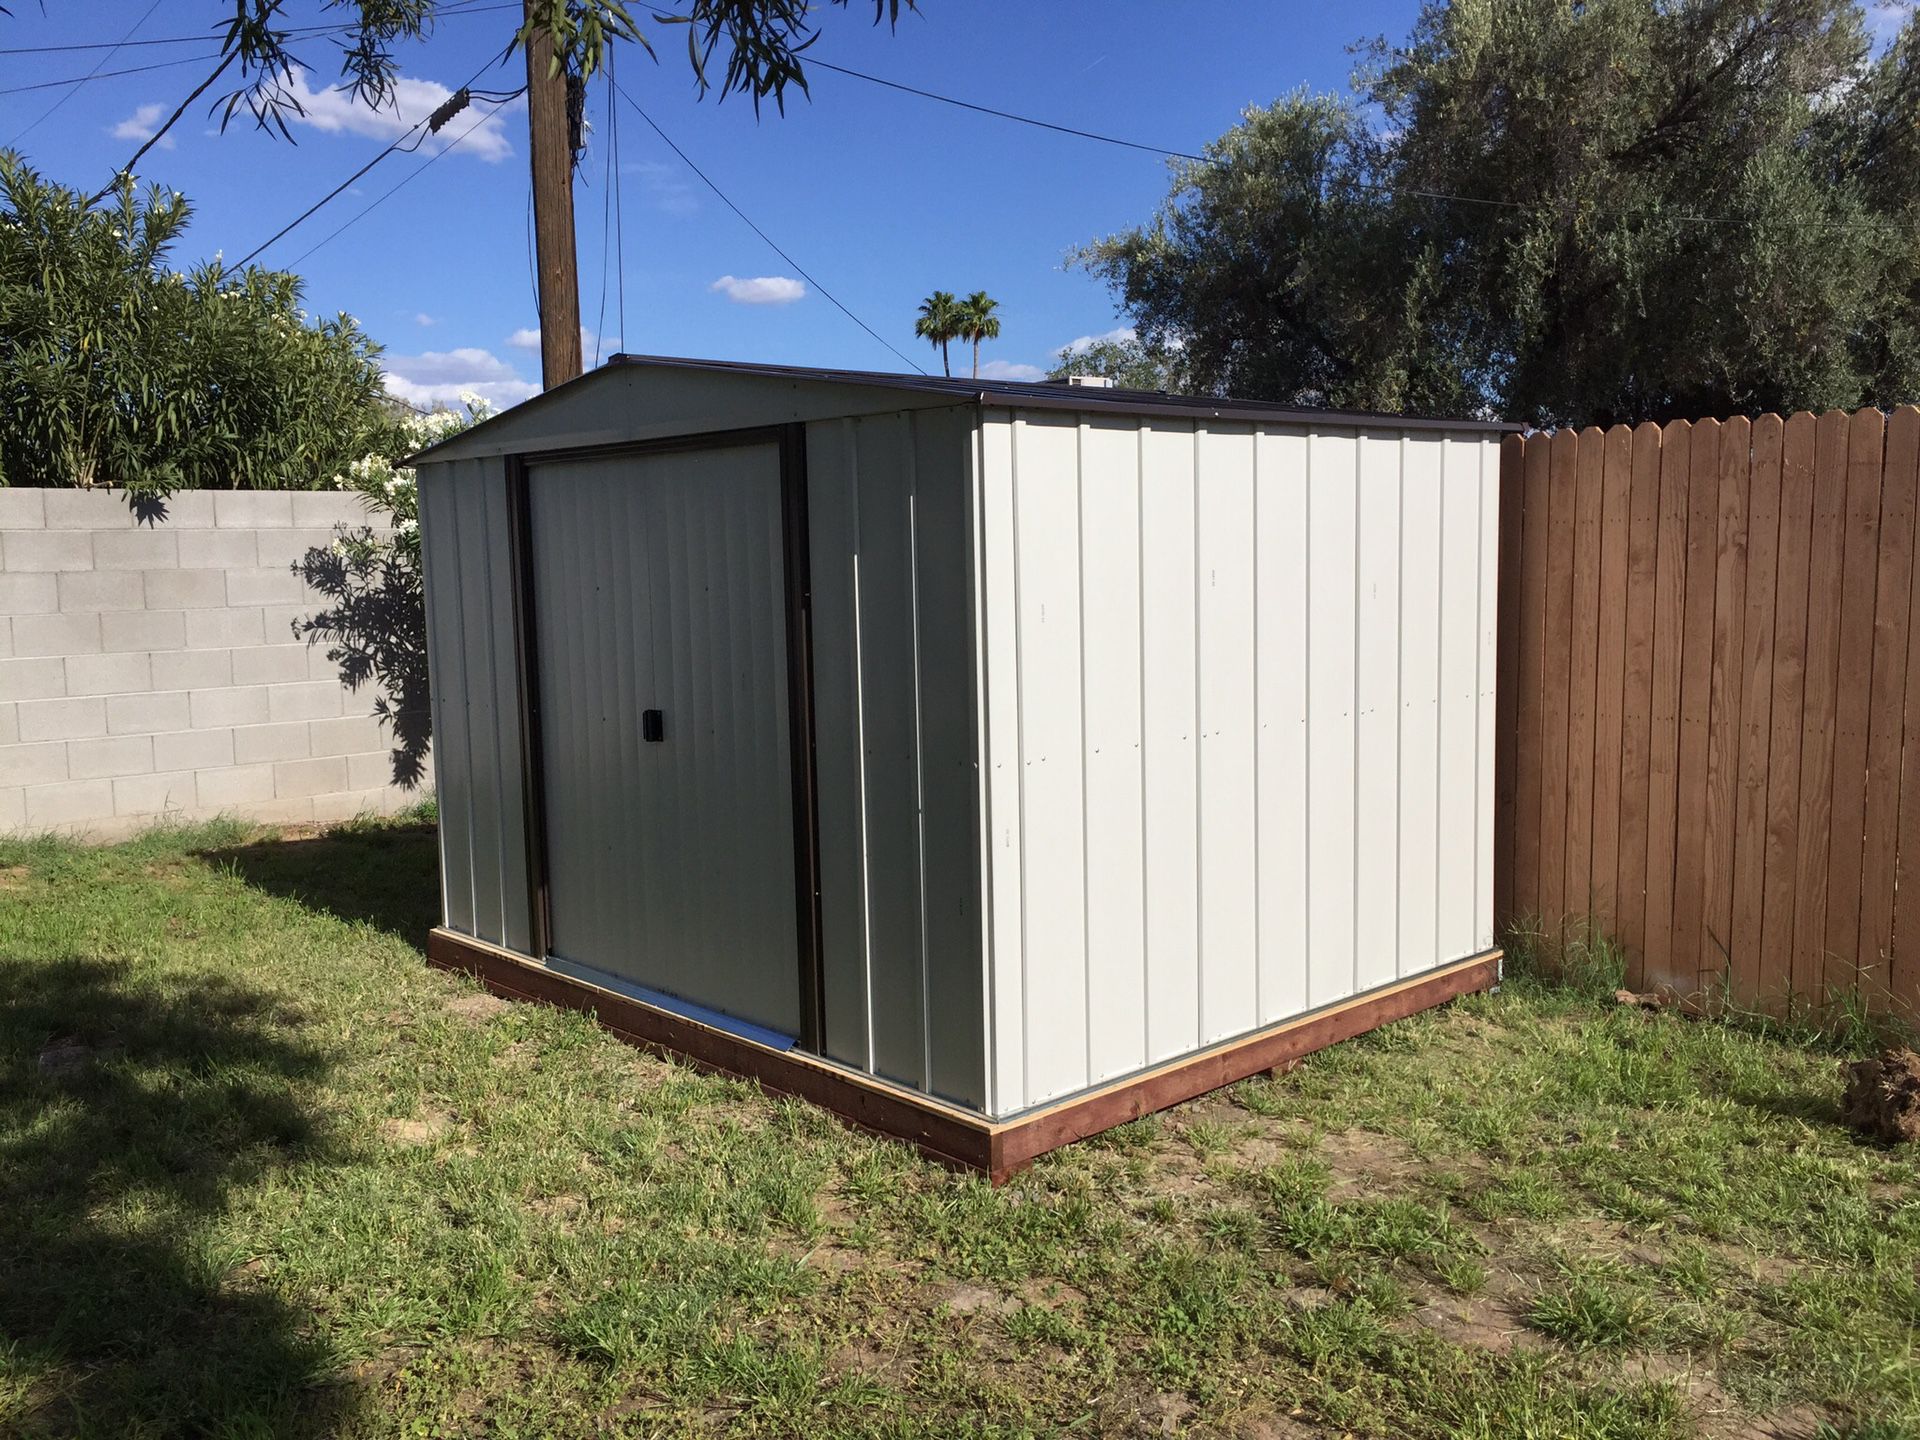 10x8 Steel Storage Shed Installed with treated lumber base